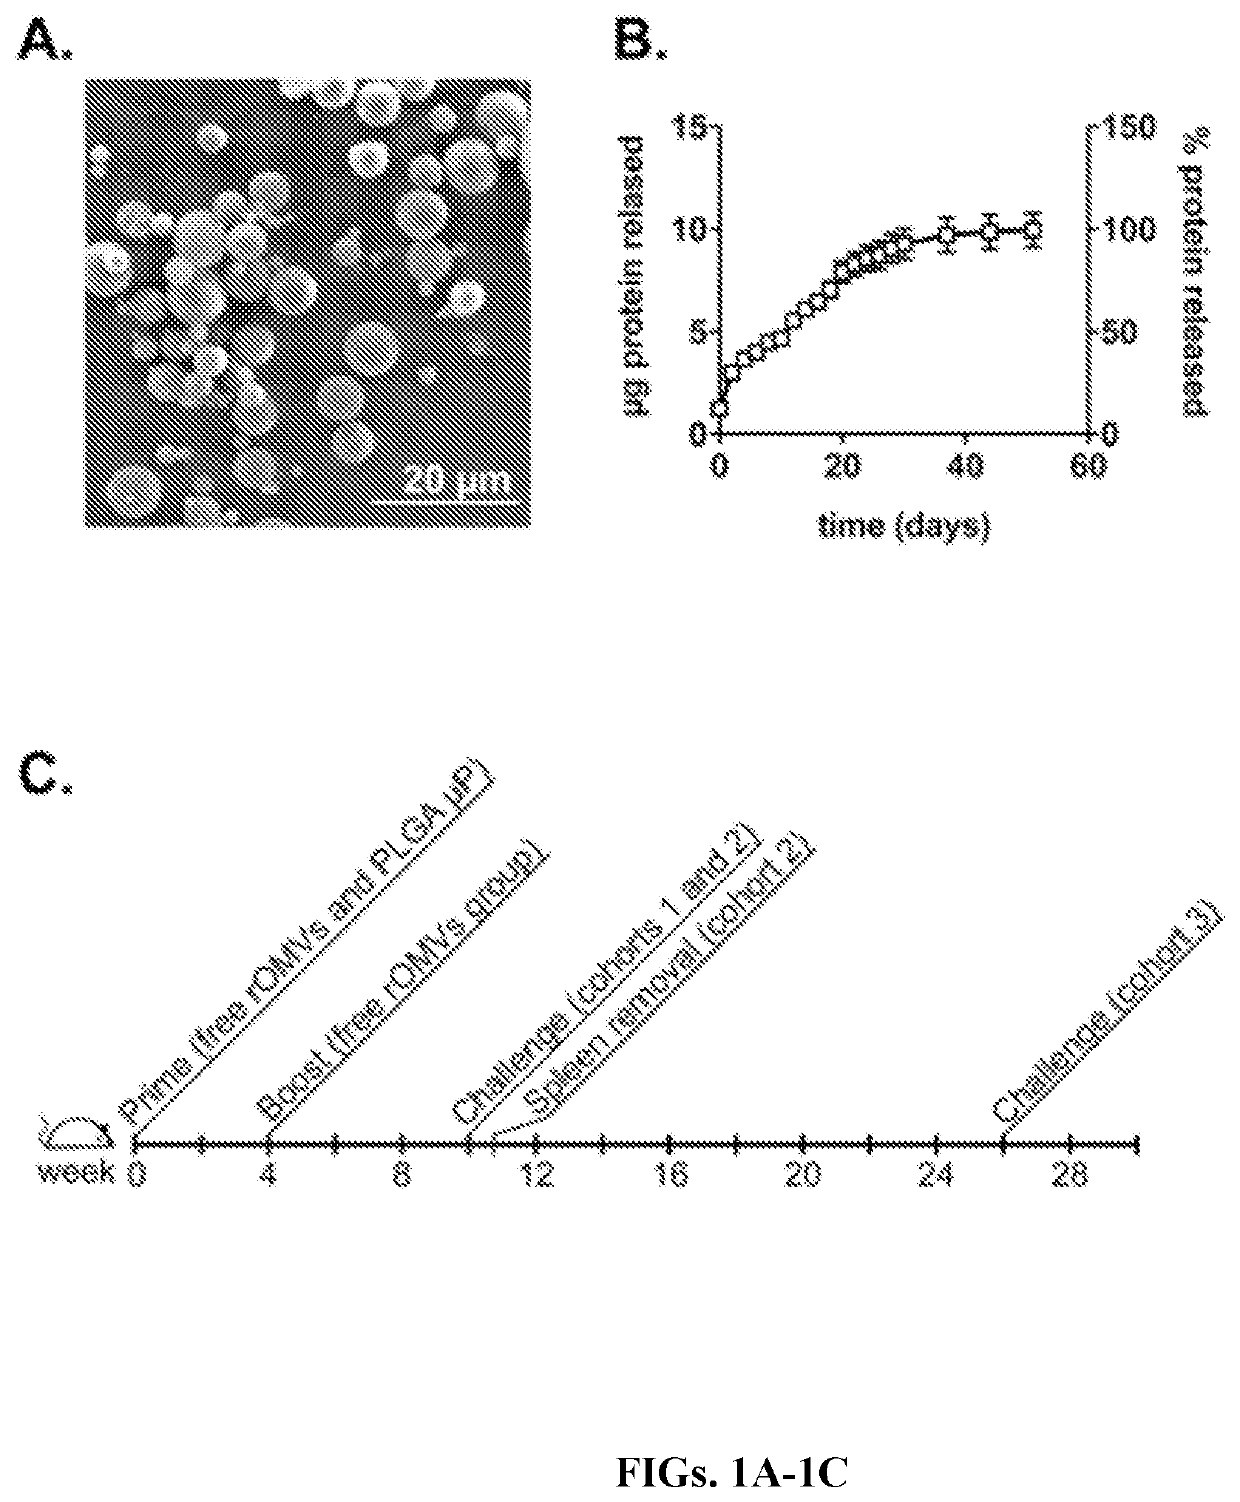 Formulation for protection through controlled release of microparticles containing recombinant outer membrane vesicles